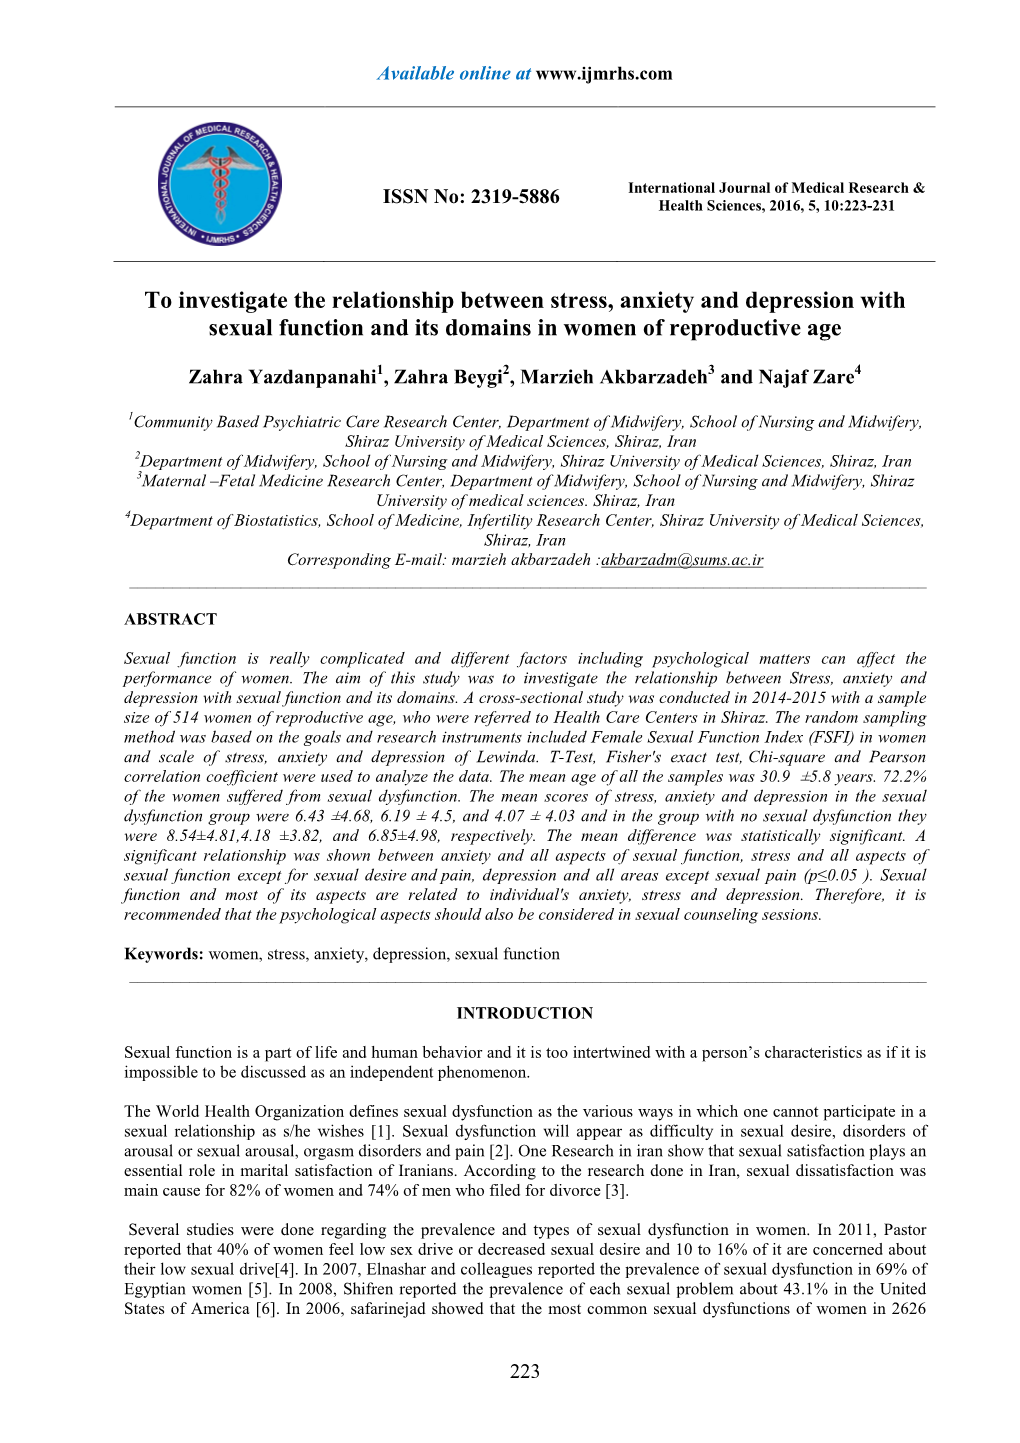 To Investigate the Relationship Between Stress, Anxiety and Depression with Sexual Function and Its Domains in Women of Reproductive Age